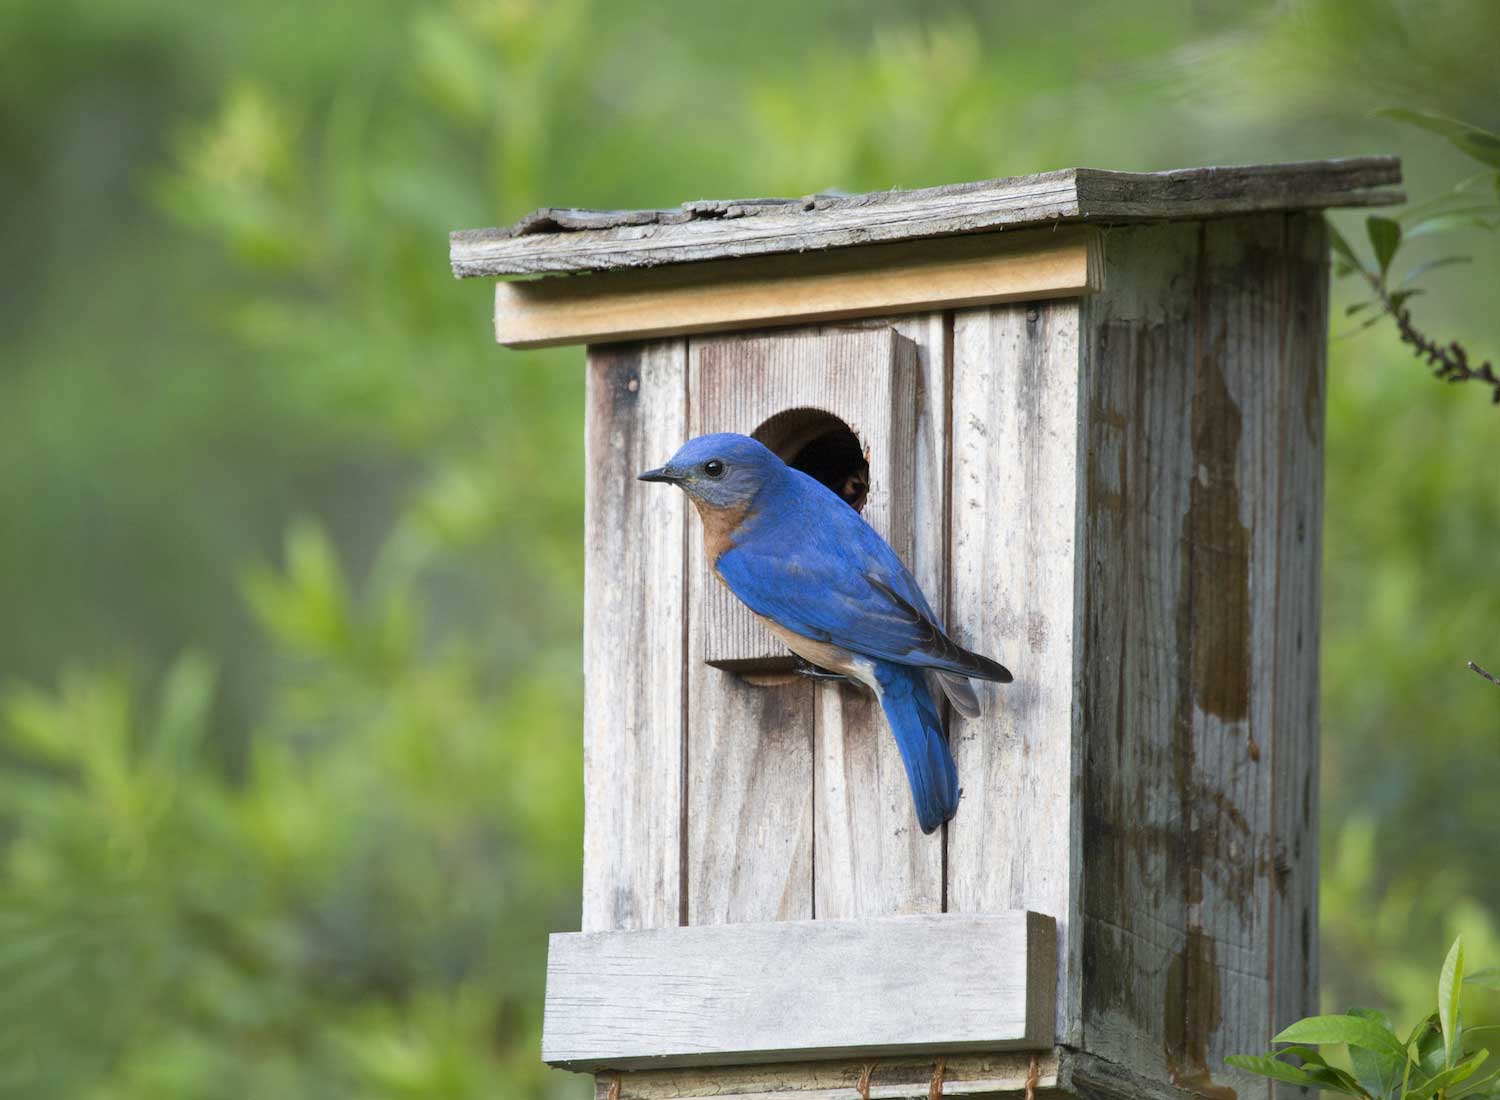 Want more birds in your yard? Try adding a birdhouse or two